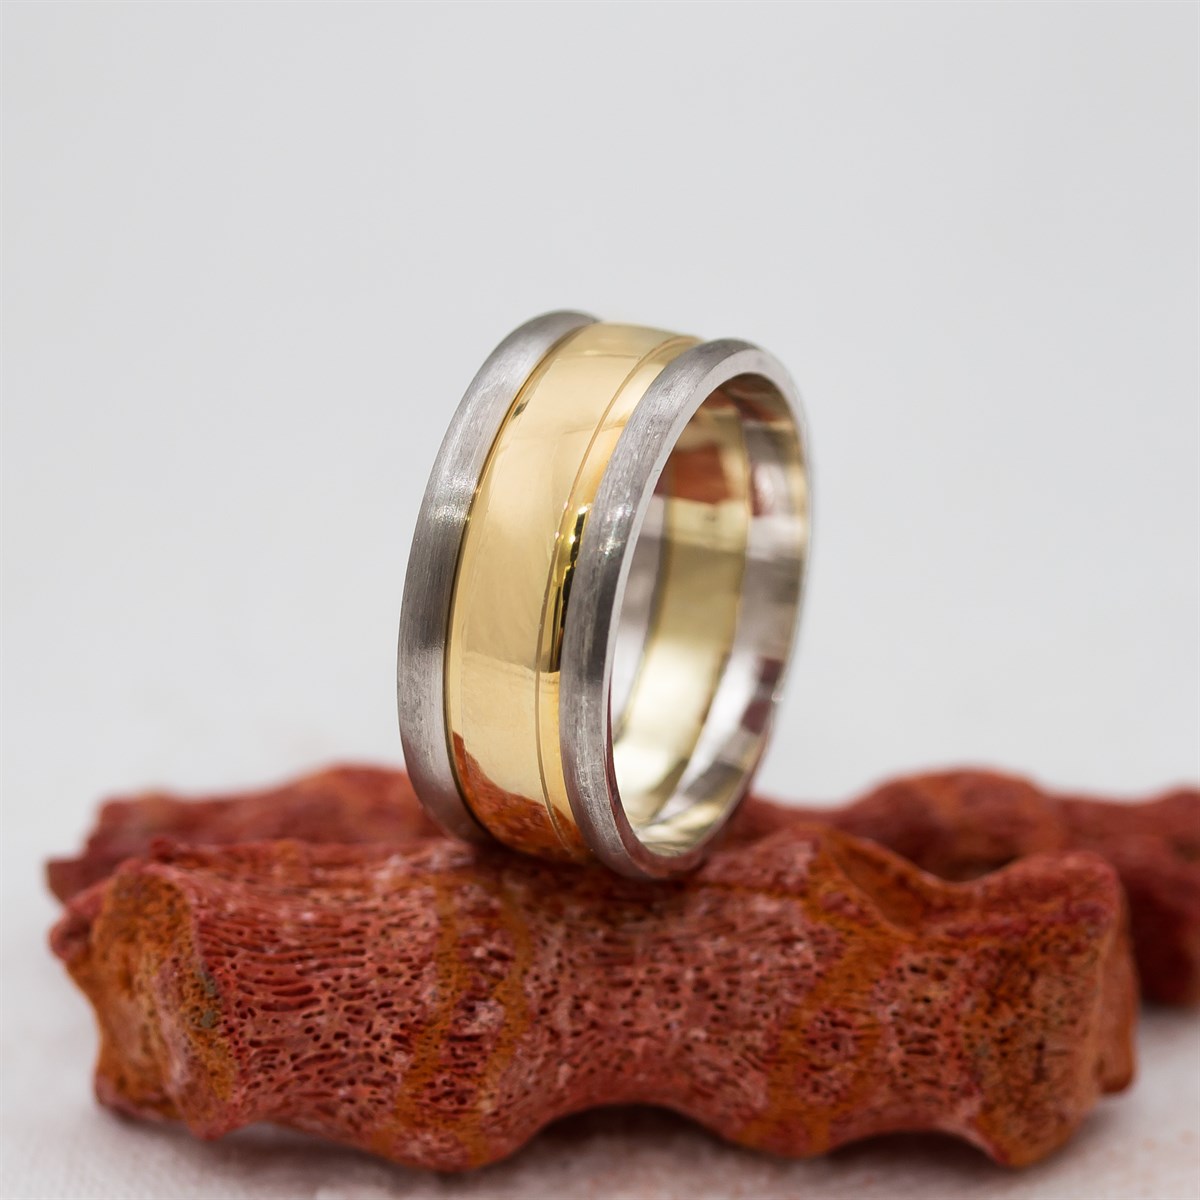 Unisex Sterling Silver Wedding Ring with Gold Broce in the Middle